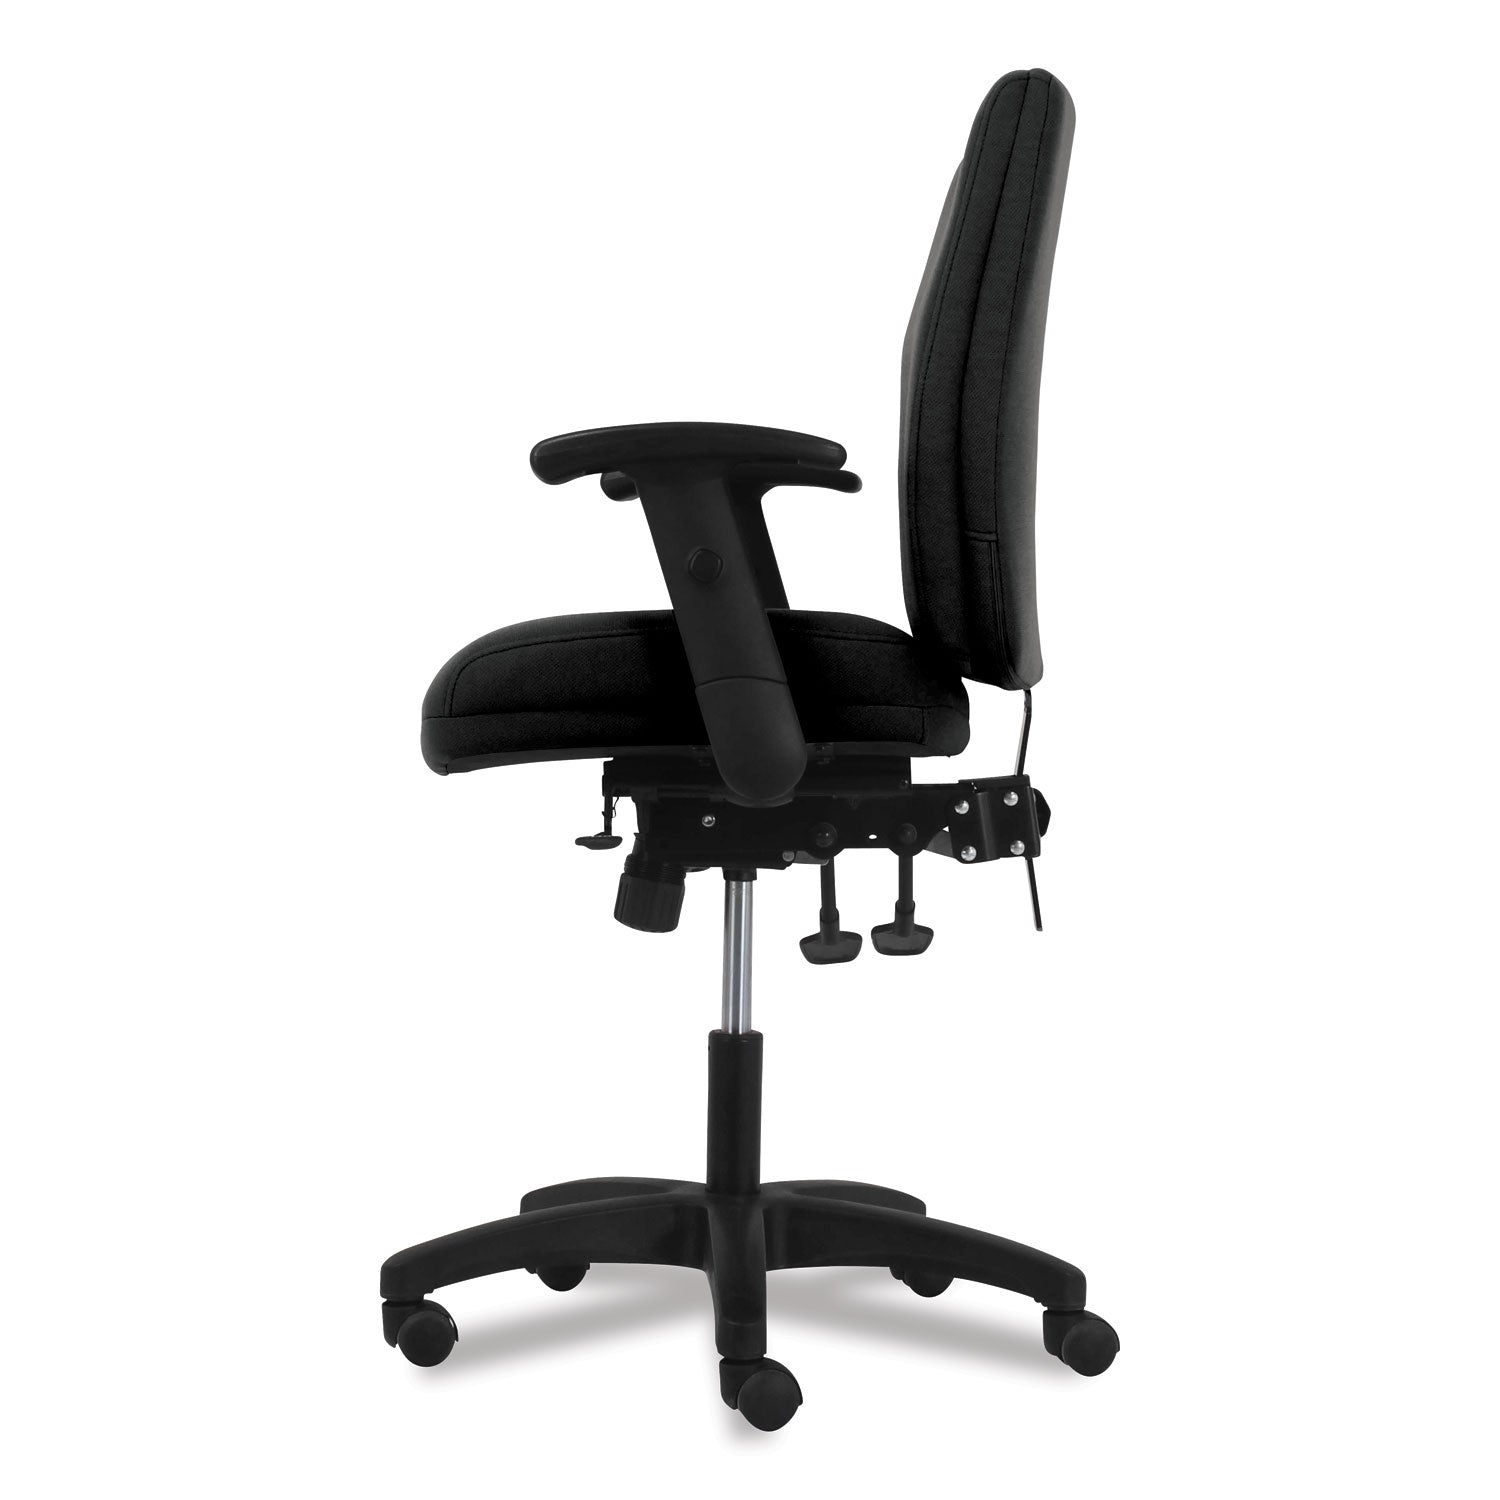 network-mid-back-task-chair-supports-up-to-250-lb-183-to-228-seat-height-black_honvl282a2va10t - 4